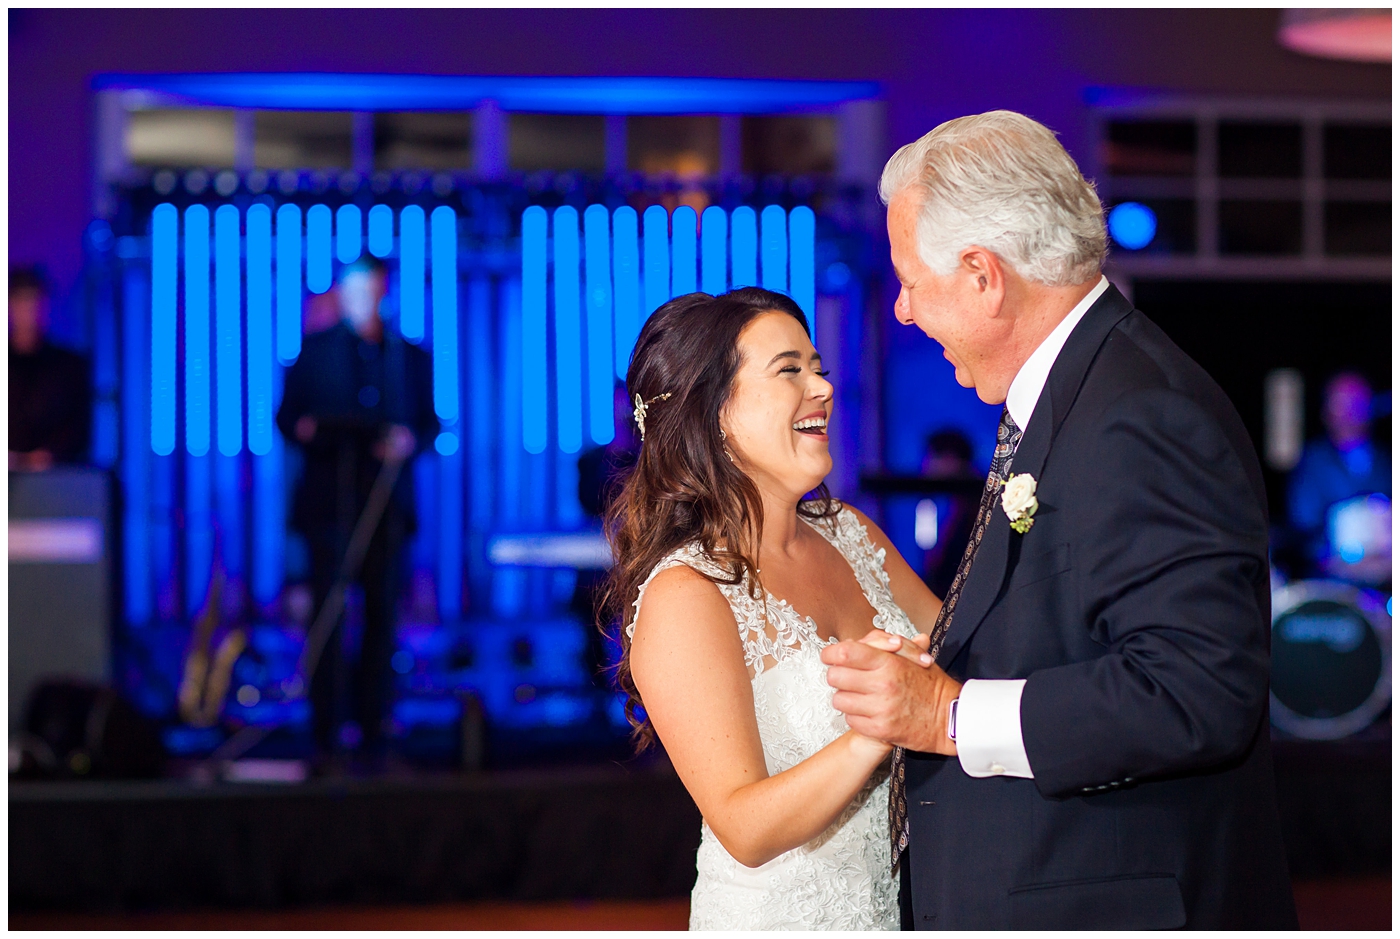 Gorgeous brunette bride in Justina Alexander wedding dress dancing with her father at wedding reception